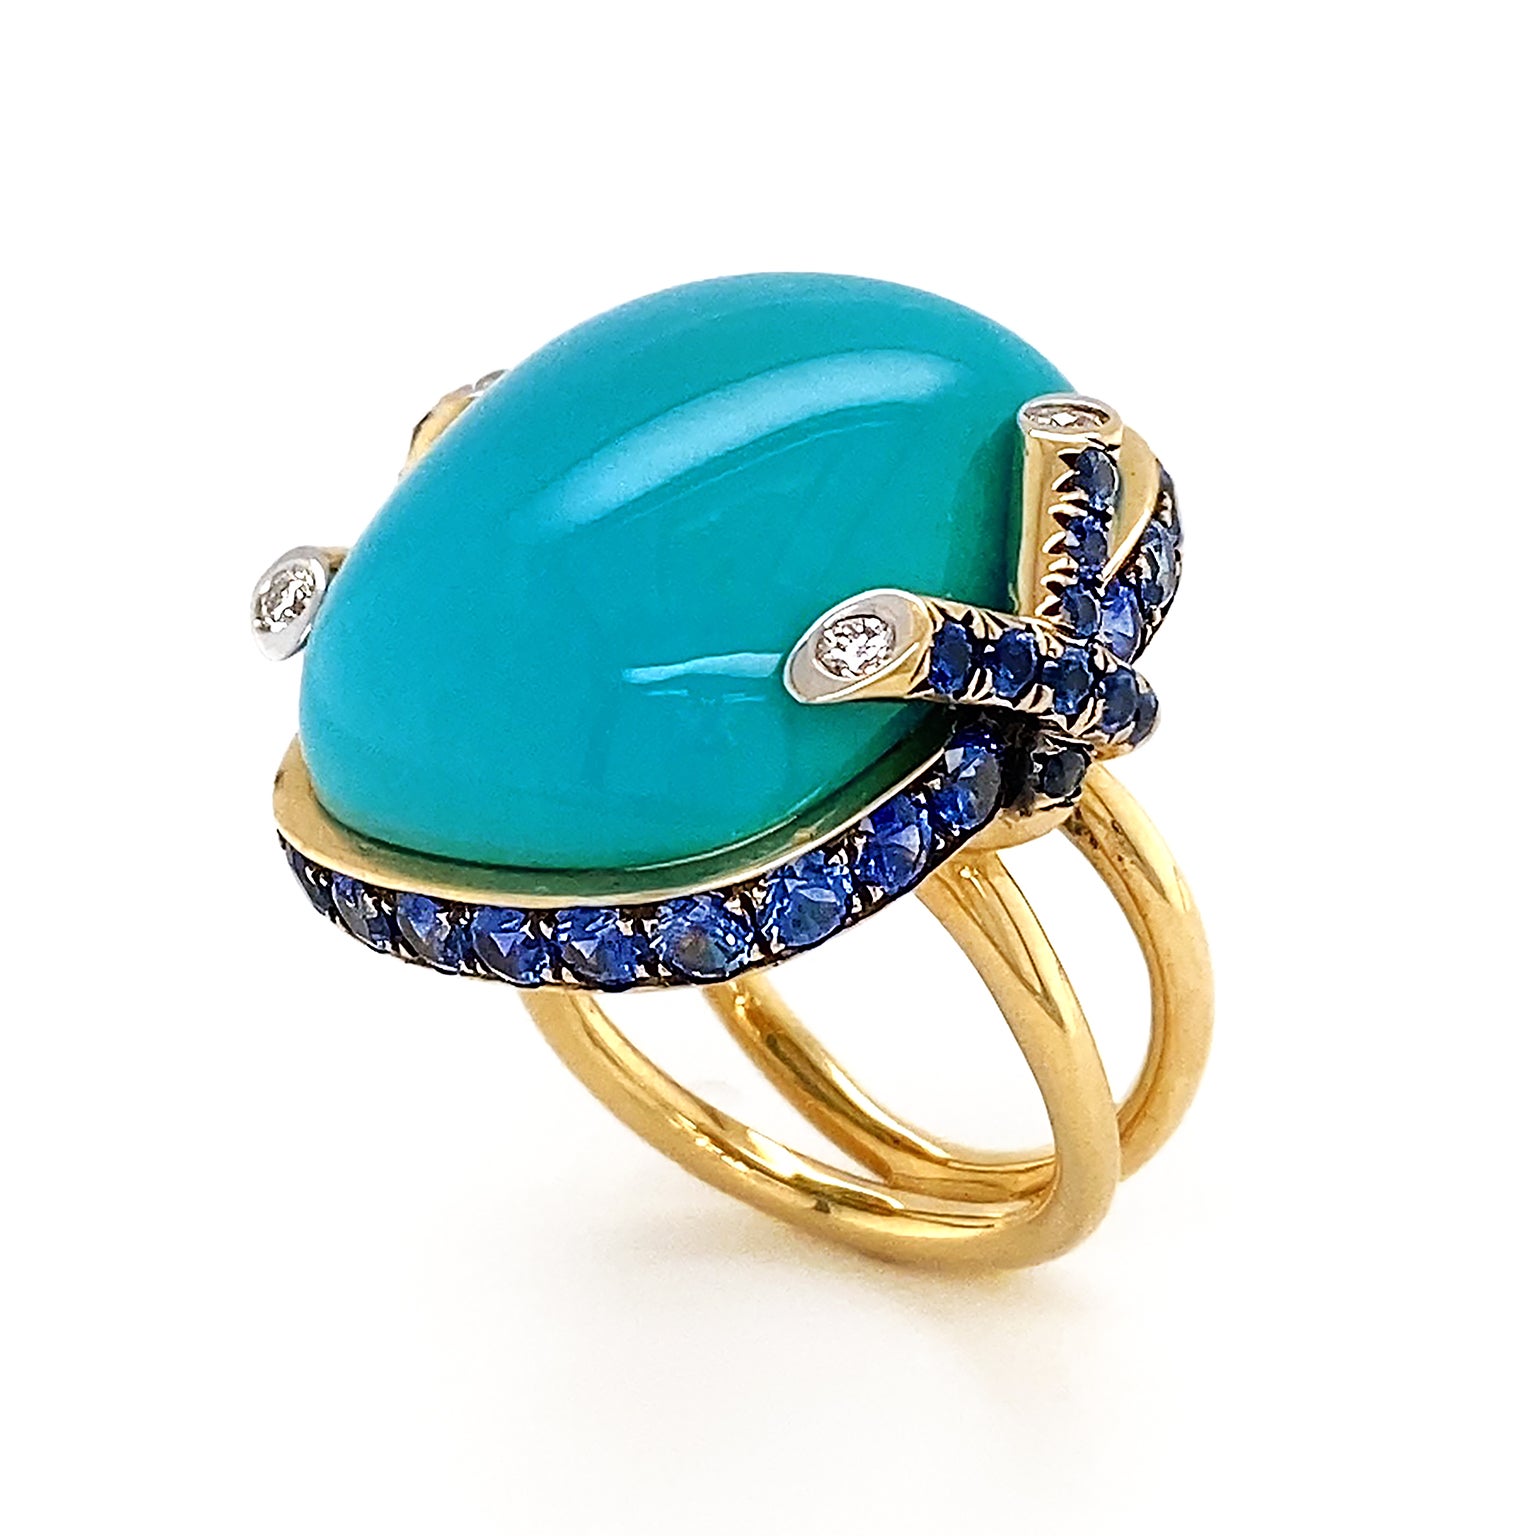 Striking blue of turquoise is the climax of this ring. The polished cabochon is bezel set in 18k yellow gold, which features two inter crossing diamond tipped strands on each side. Sapphires rotate in the bezel setting for a glimmering tranquil